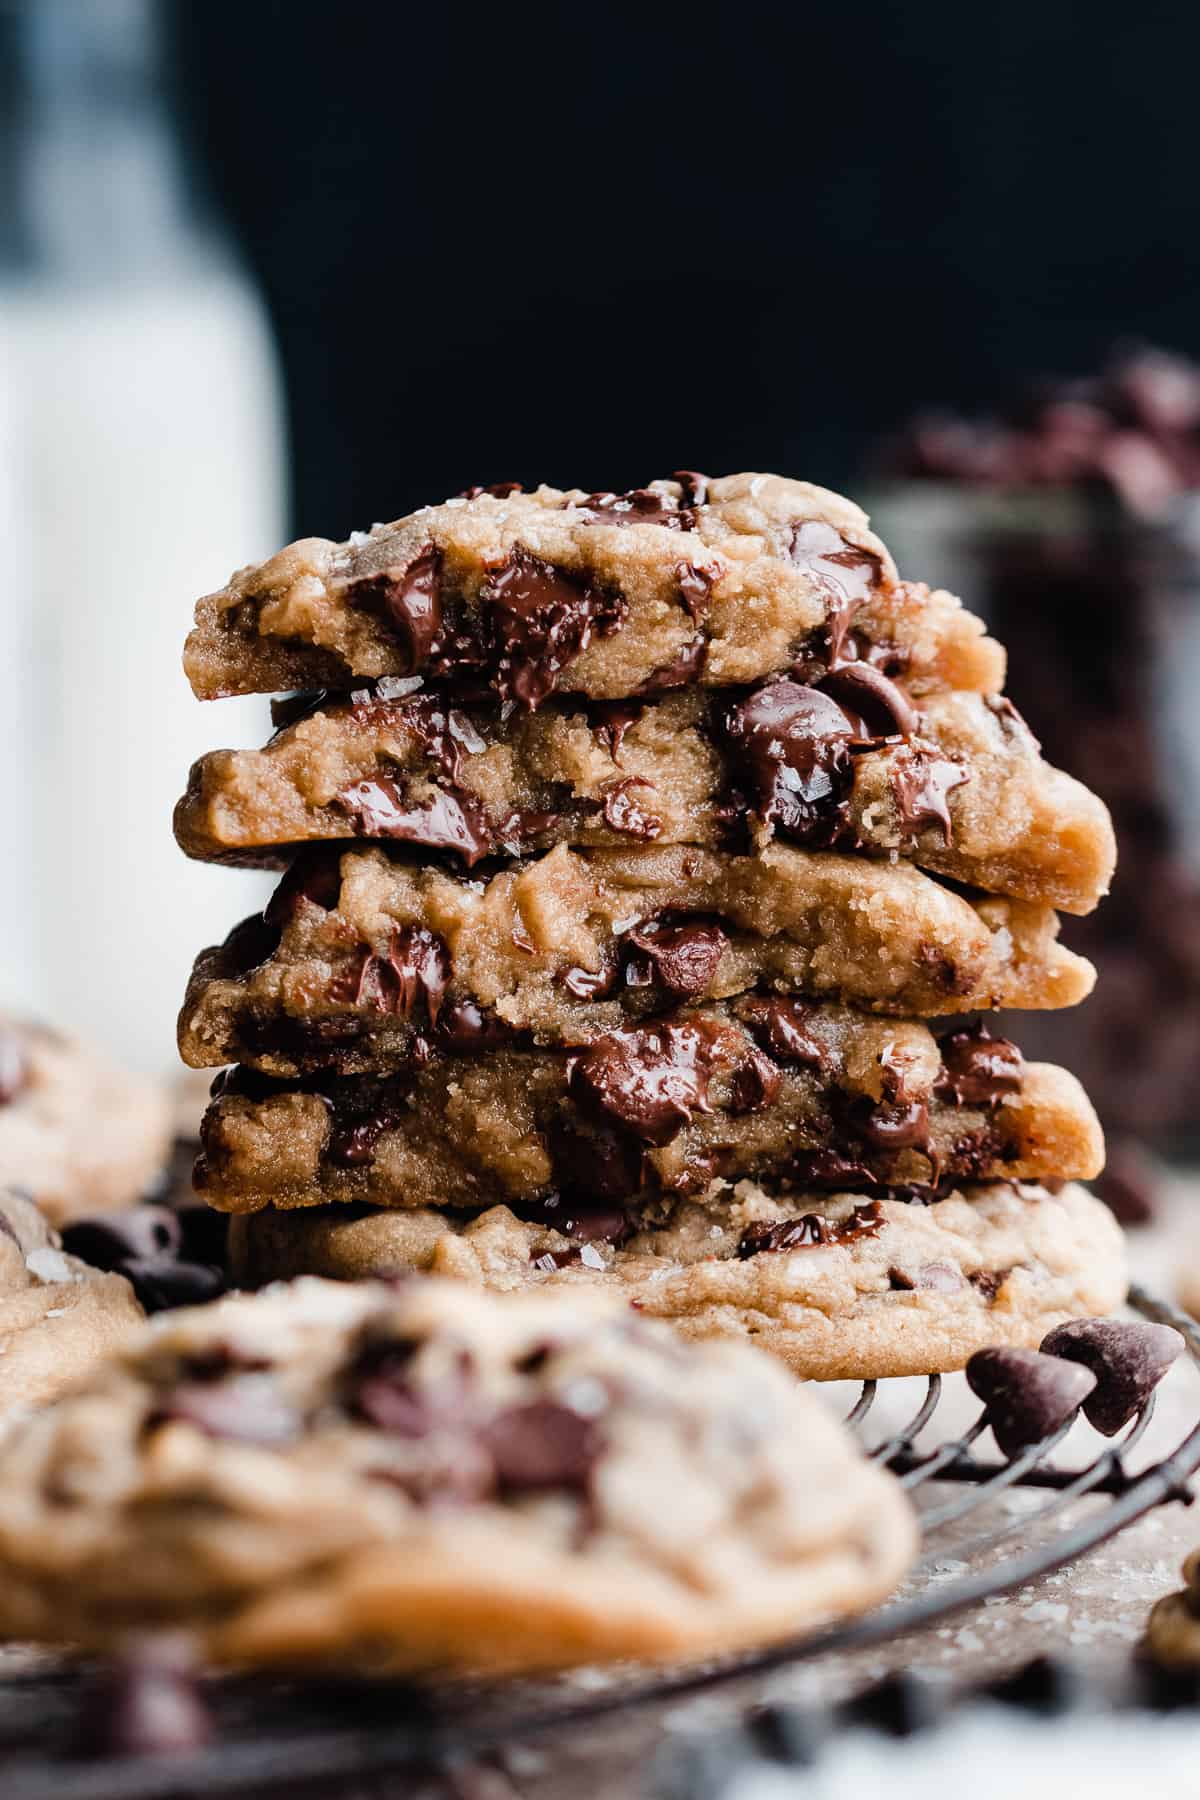 A stack of cookie halves, showing their gooey insides with melty chocolate chips.